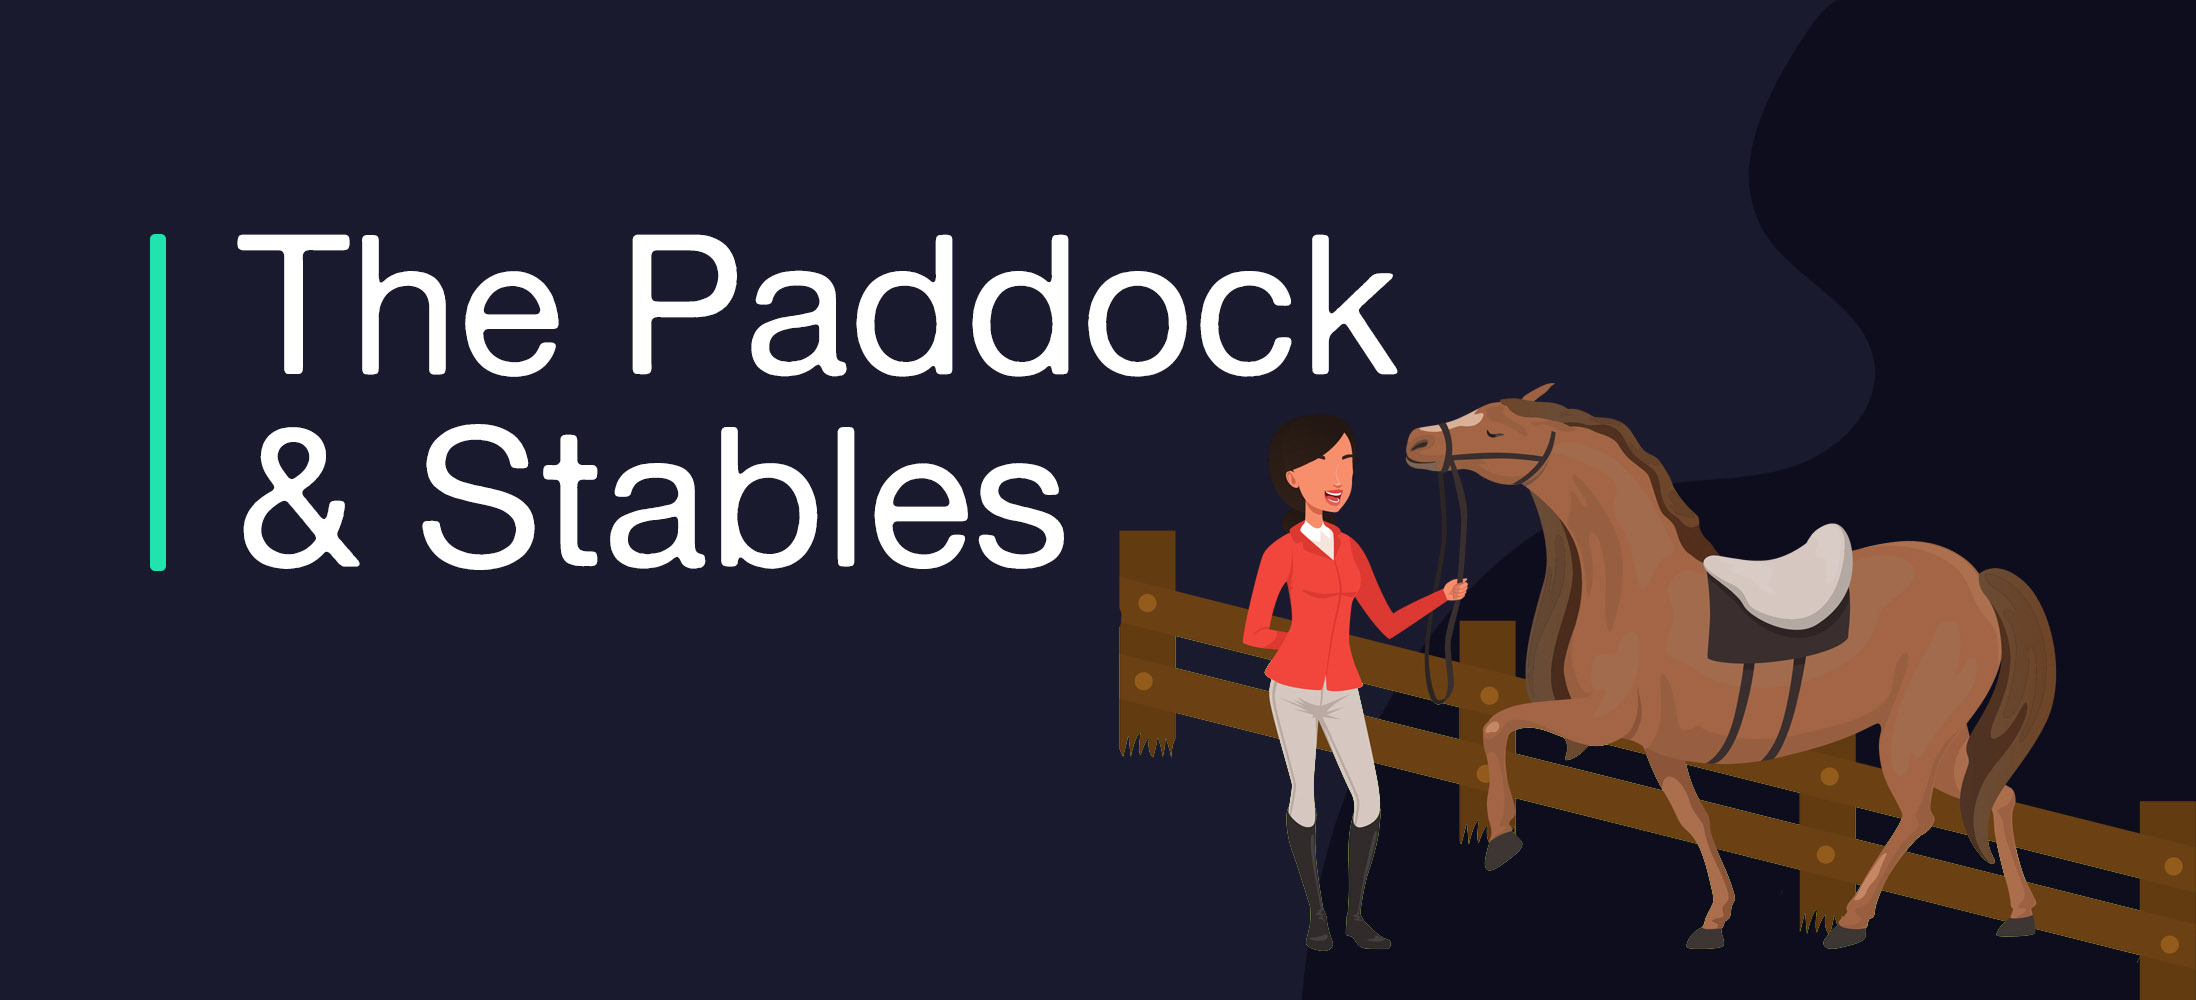 The Paddock & Stables